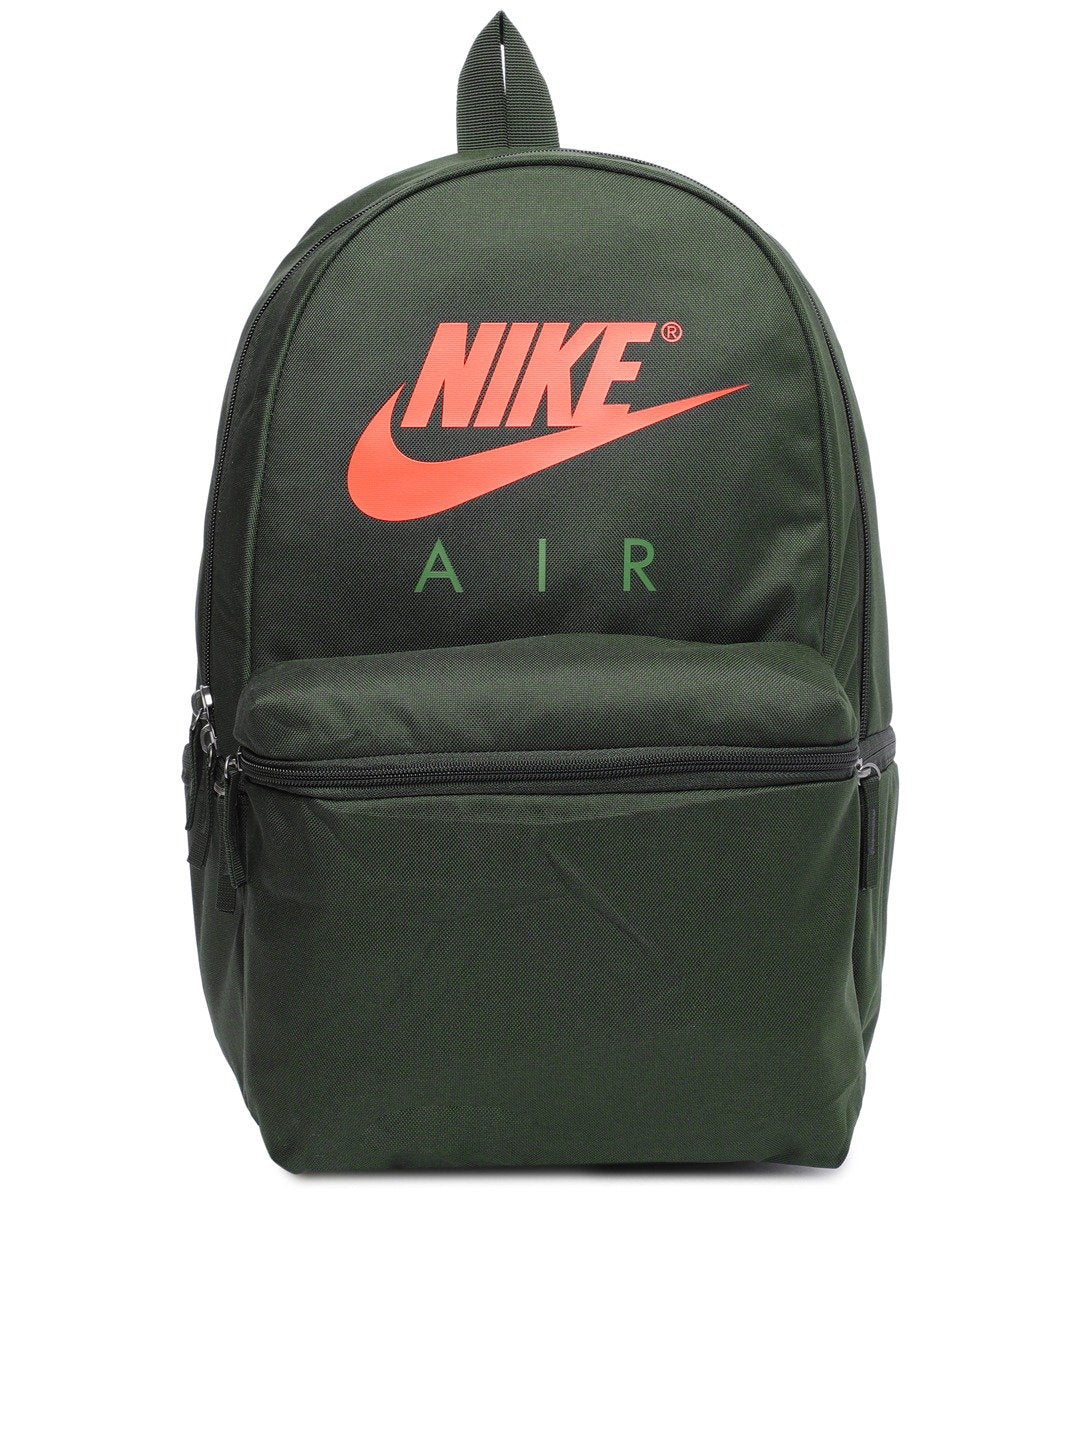 Unisex Green Brand Logo Air Backpack - Discount Store